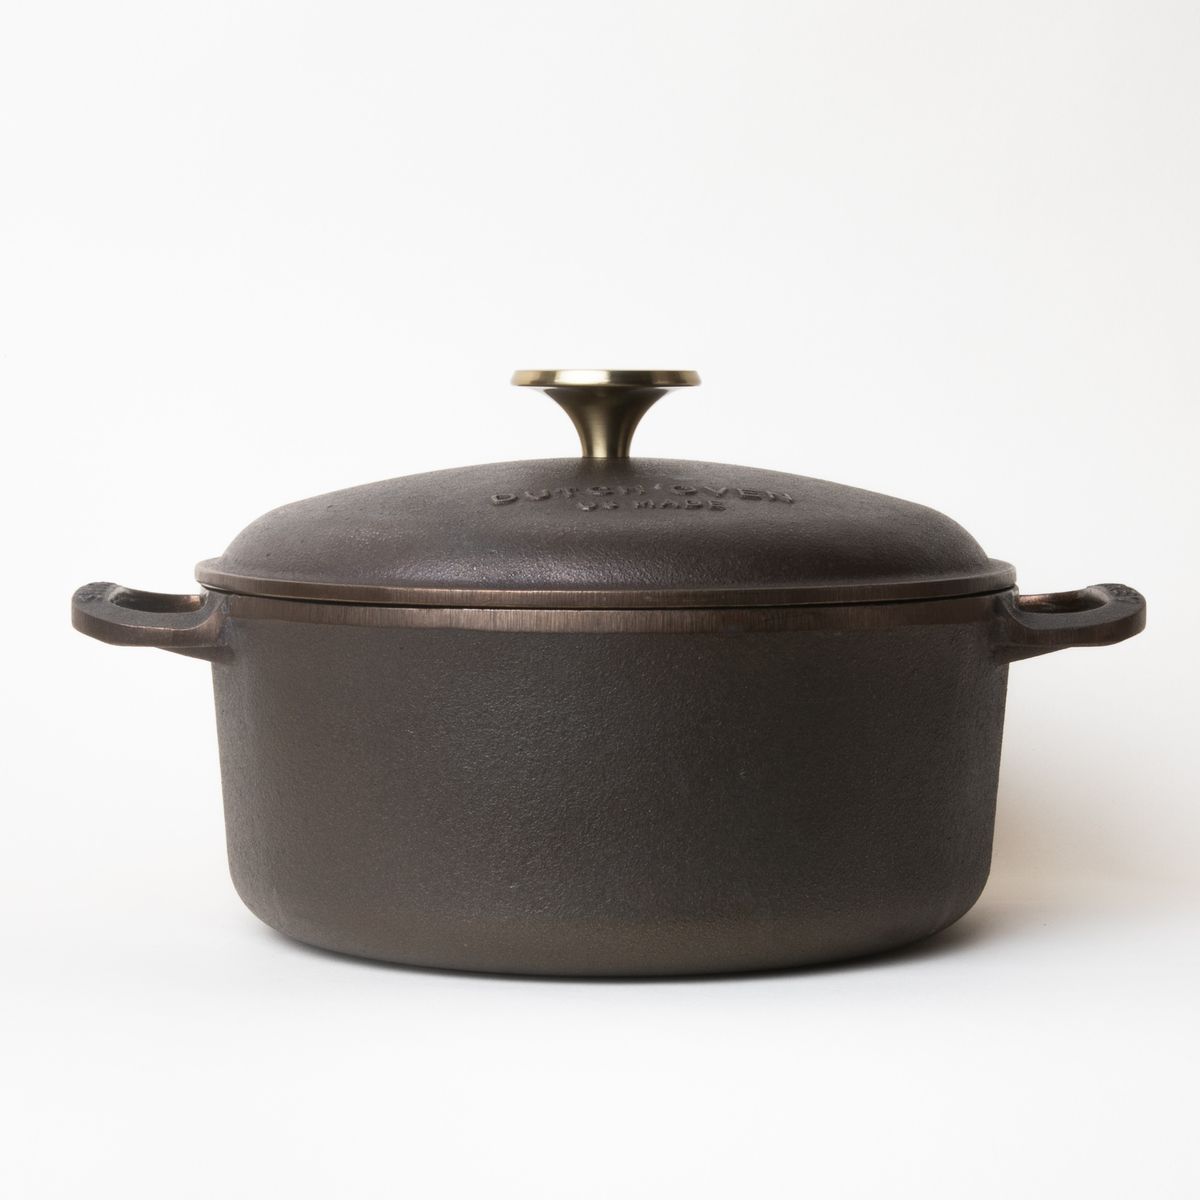 Cast iron dutch oven with a handle on each side and cast iron lid with a gold metal knob